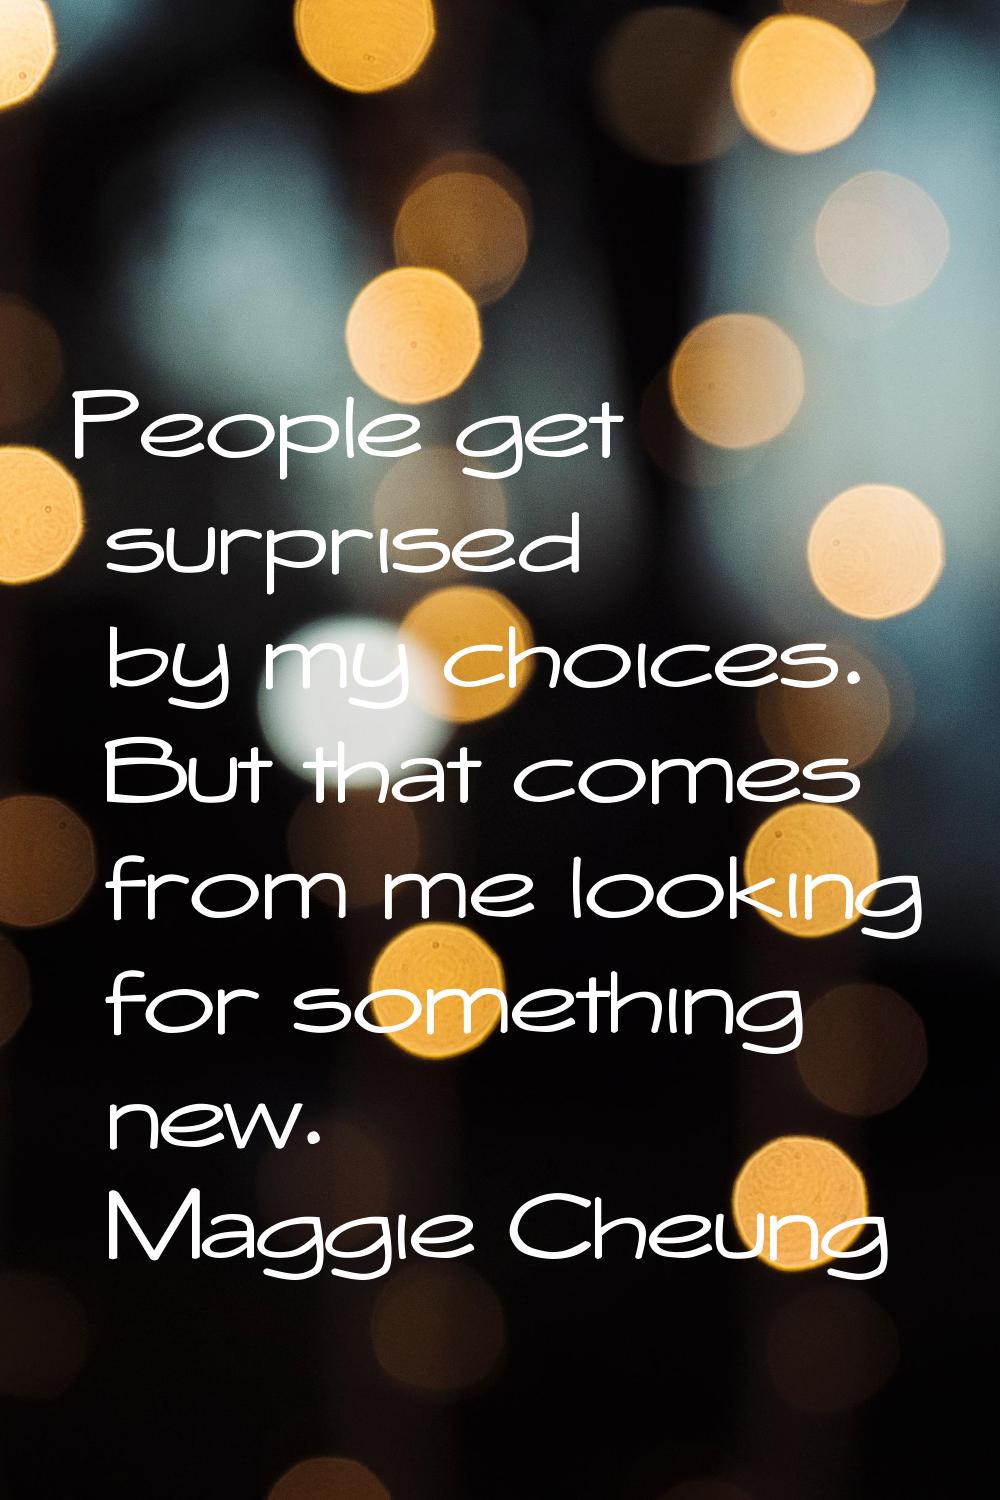 People get surprised by my choices. But that comes from me looking for something new.